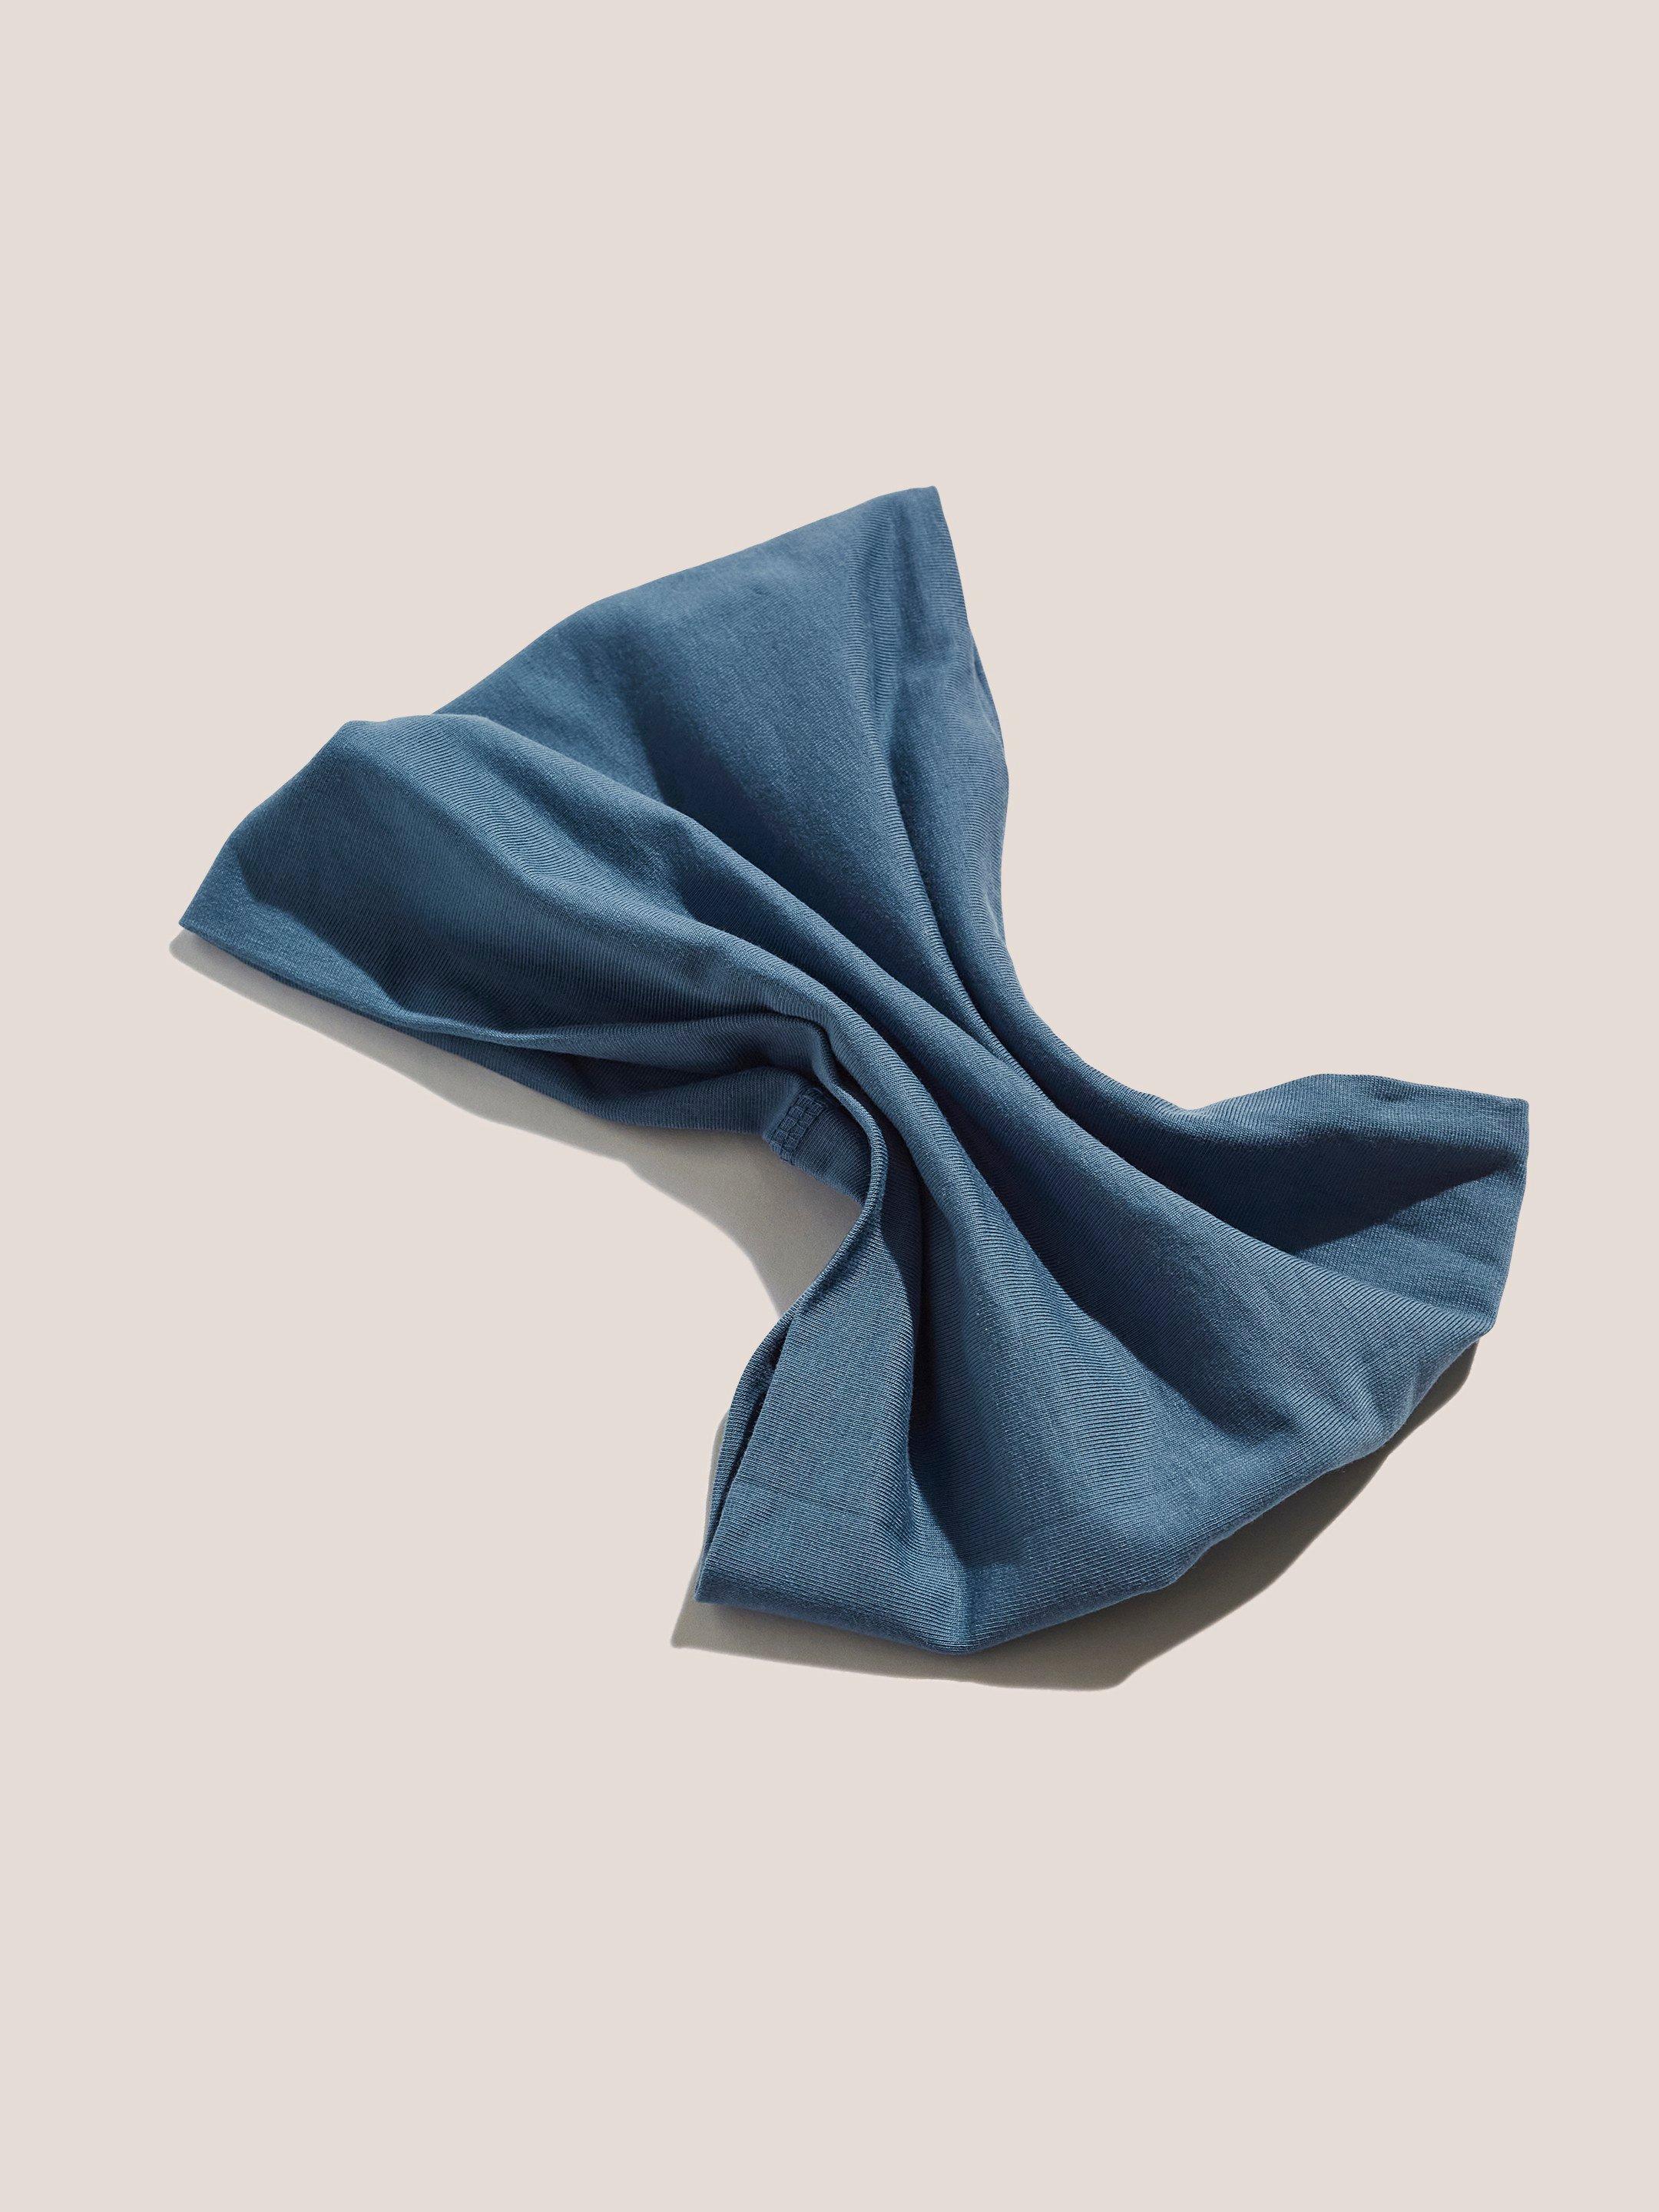 Versatile Casual Jersey Roll in DK TEAL - FLAT FRONT